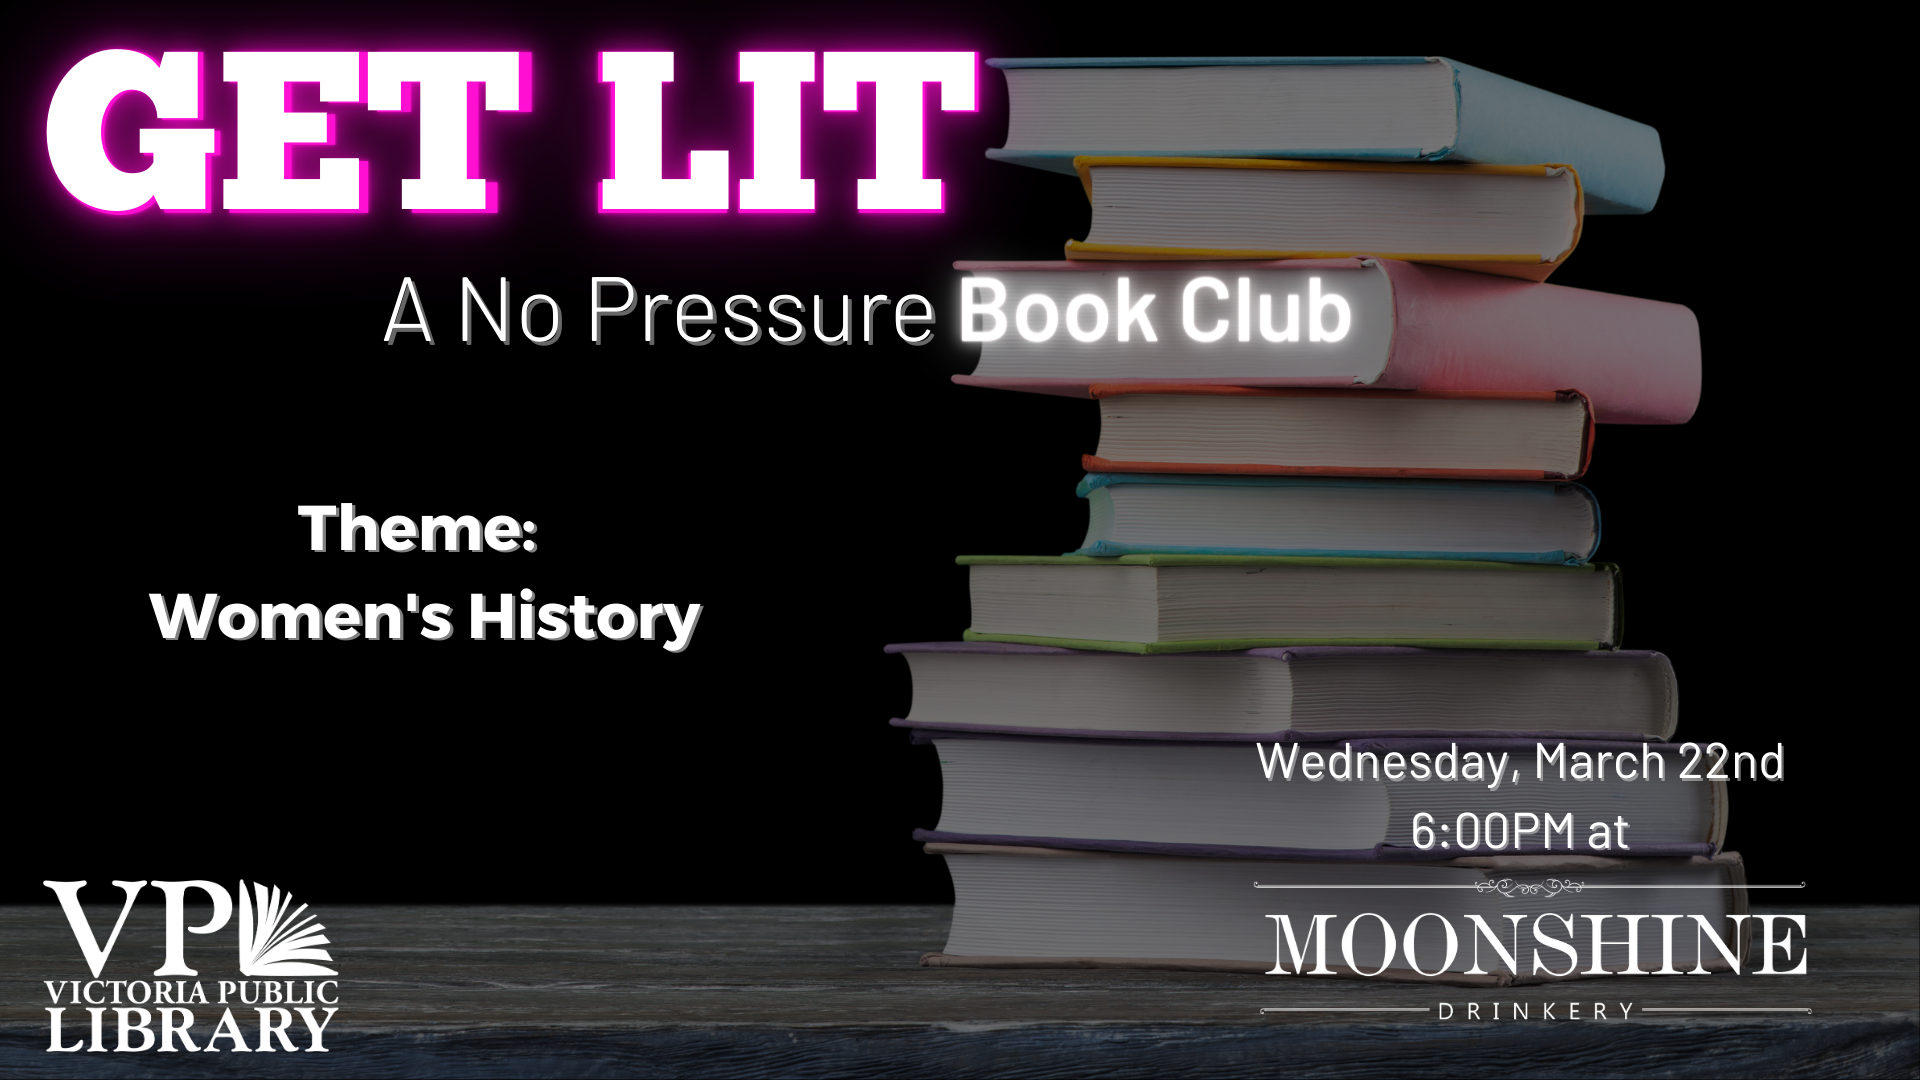 No Pressure Book Club, March 22nd at 6pm, offsite at Moonshine